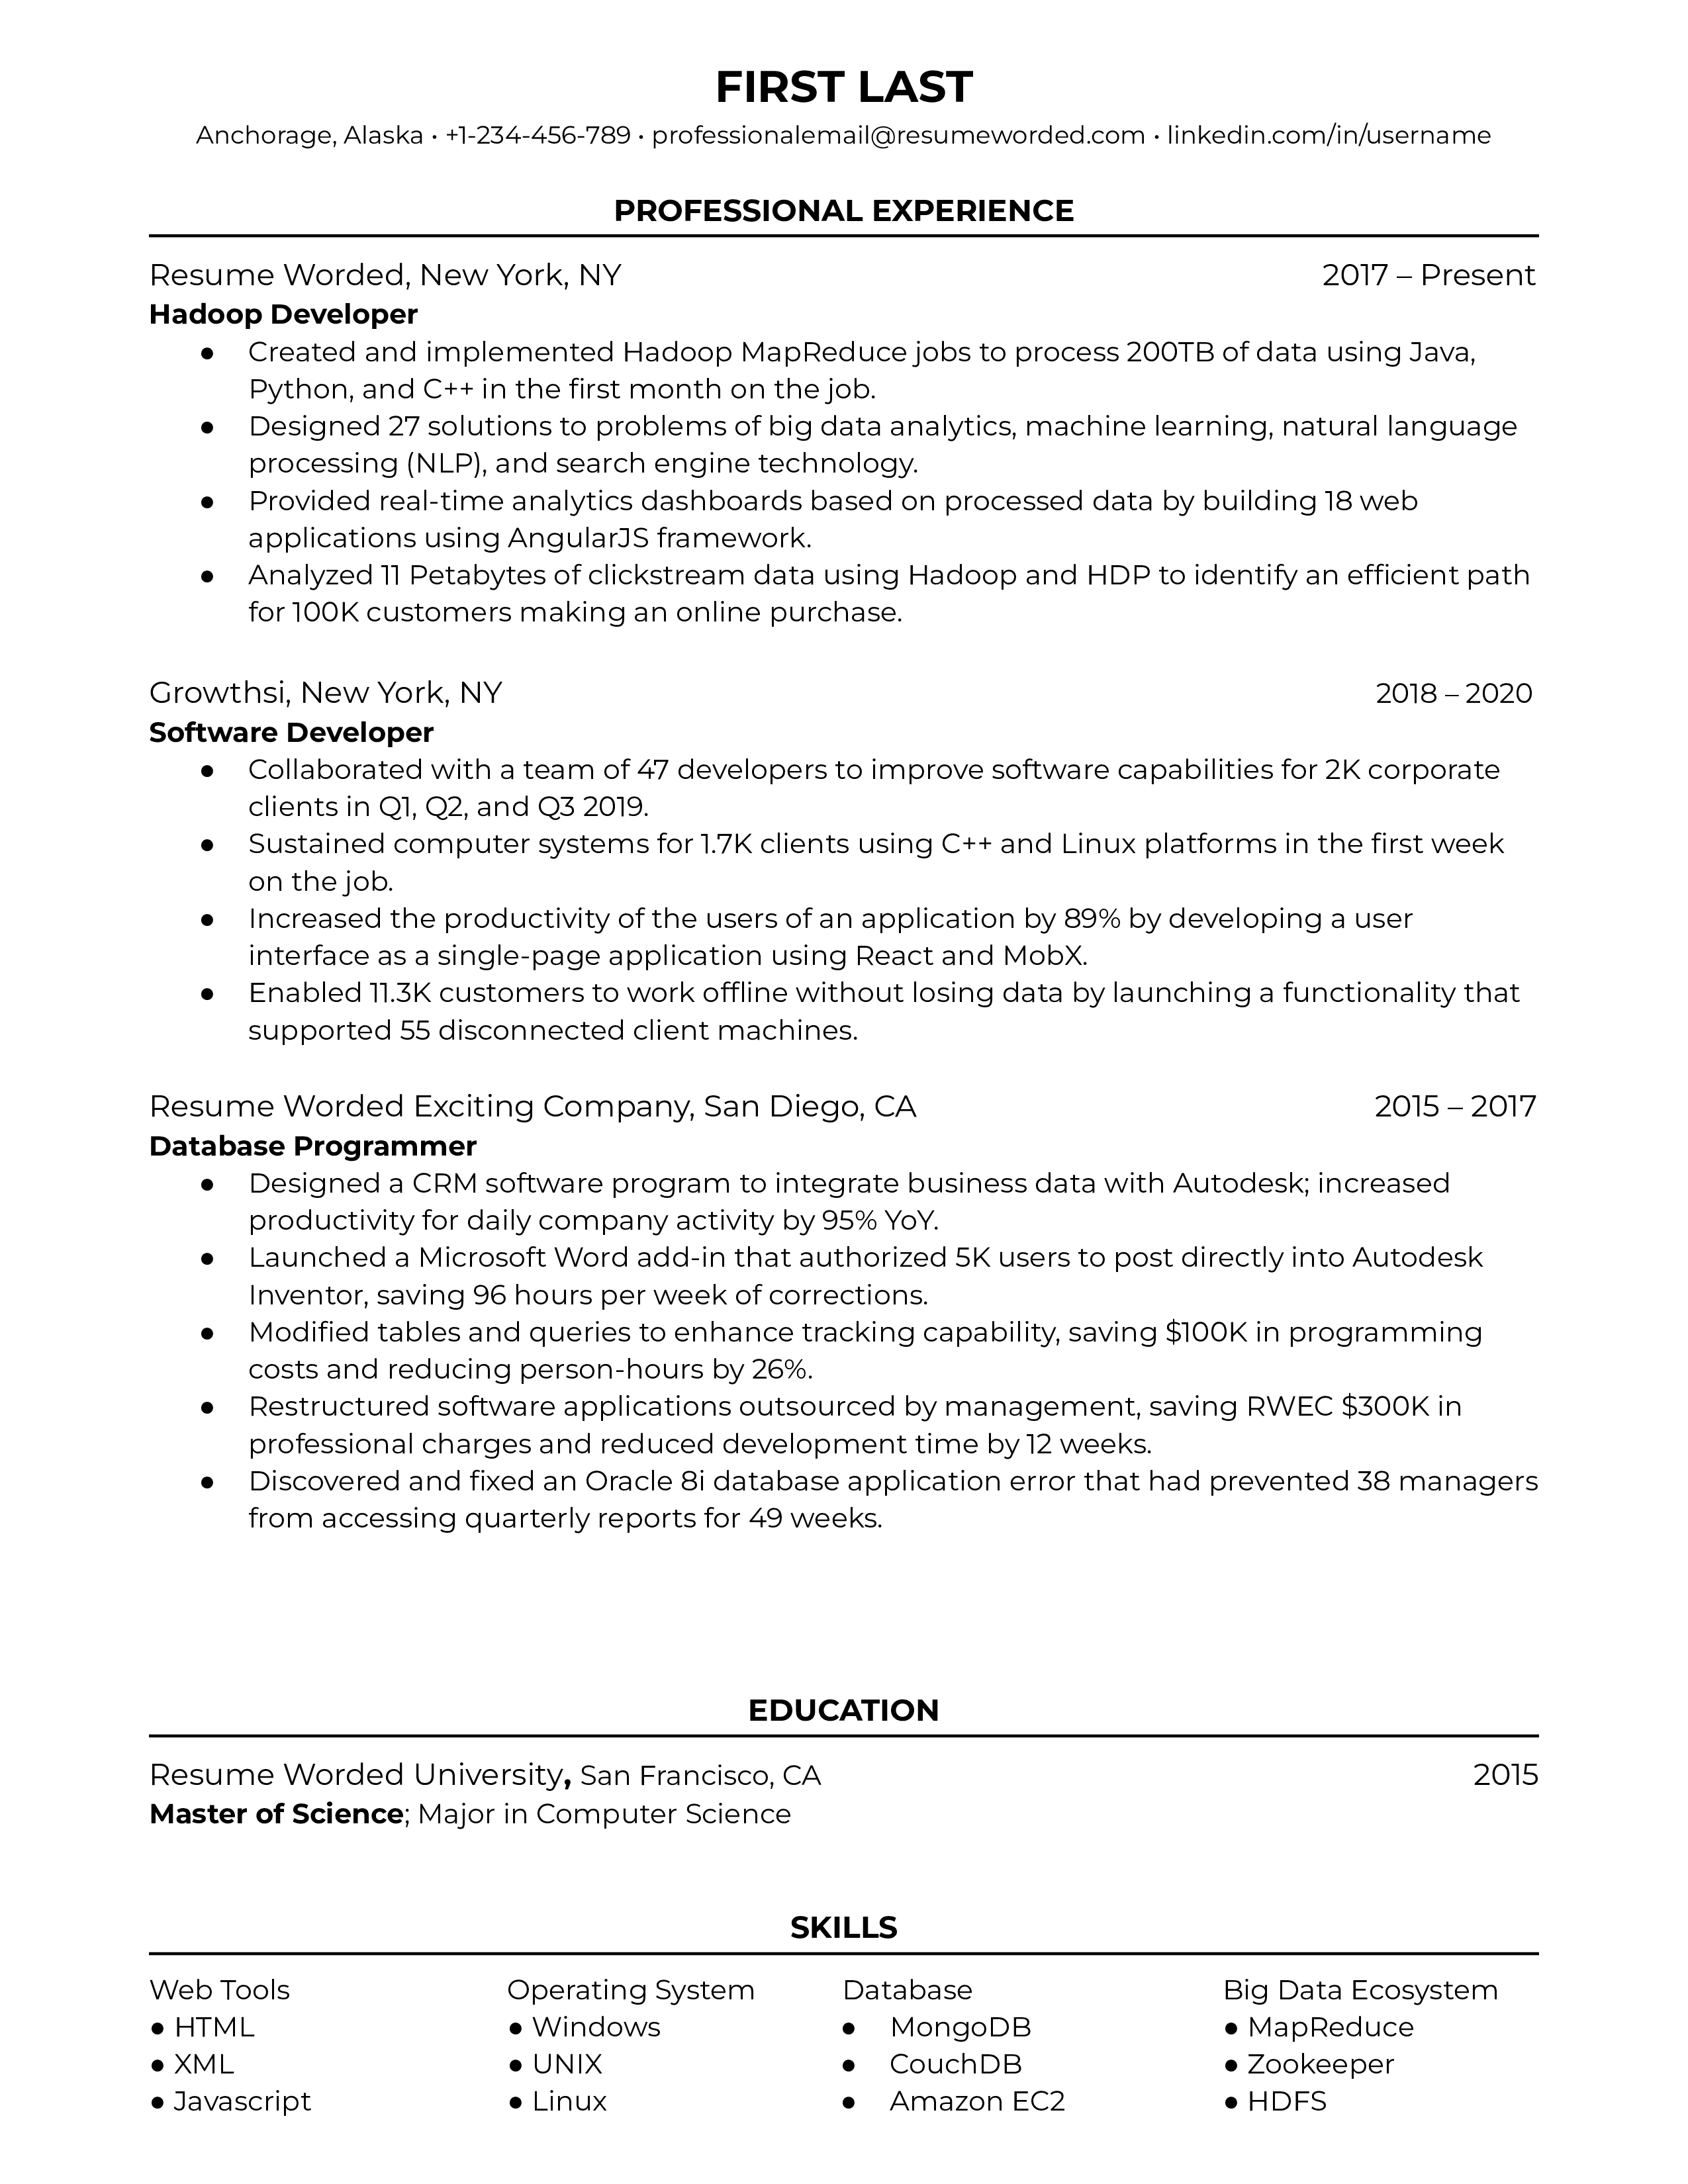 A Hadoop developer resume template that emphasizes professional experience